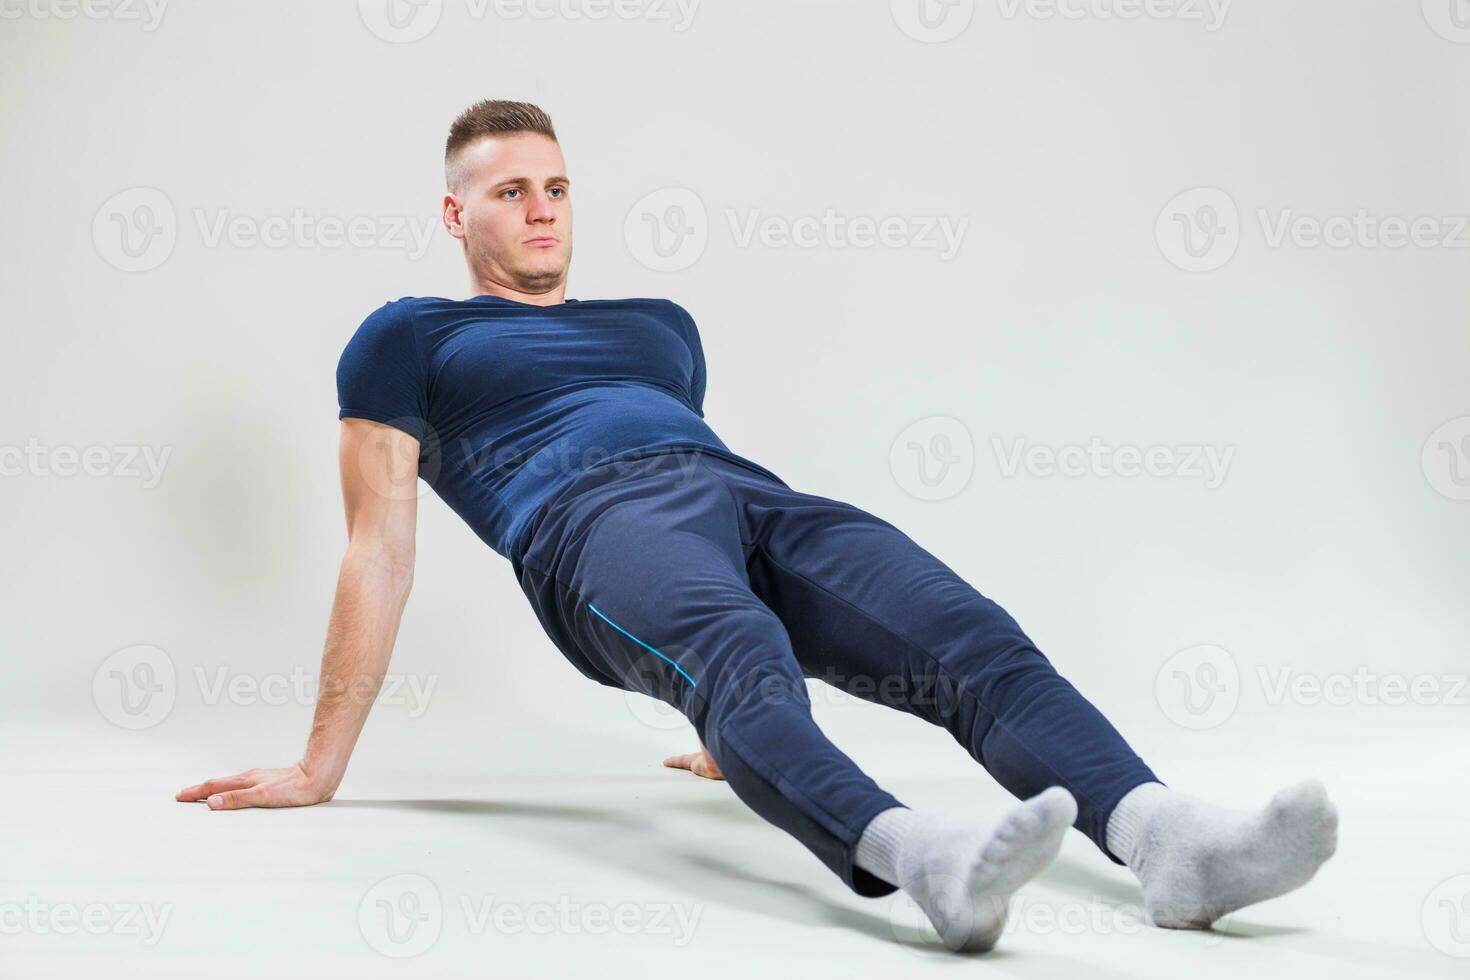 A man doing physical exercises photo